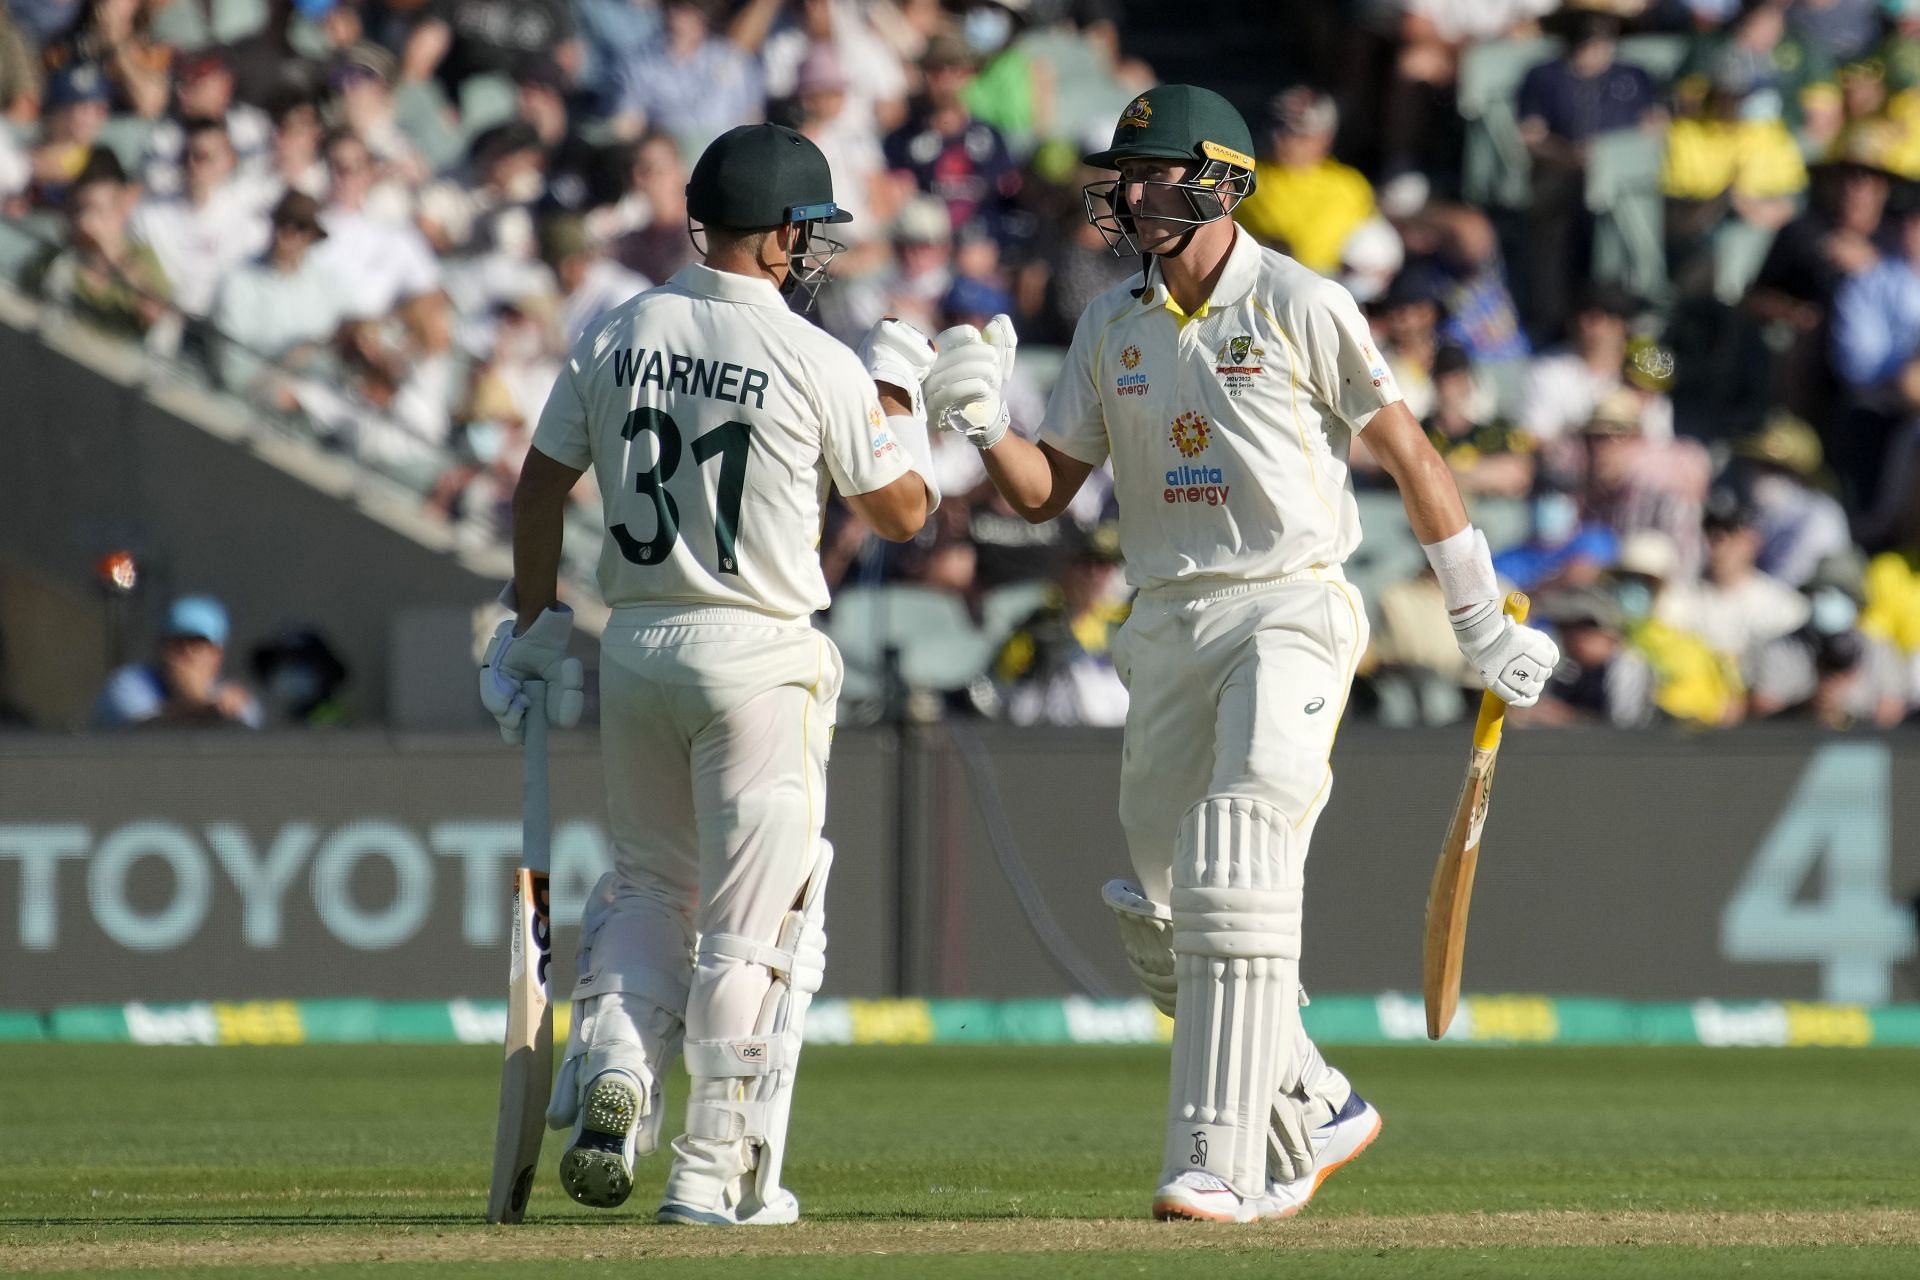 Warner and Labuschagne (R) were at their best against England at Adelaide